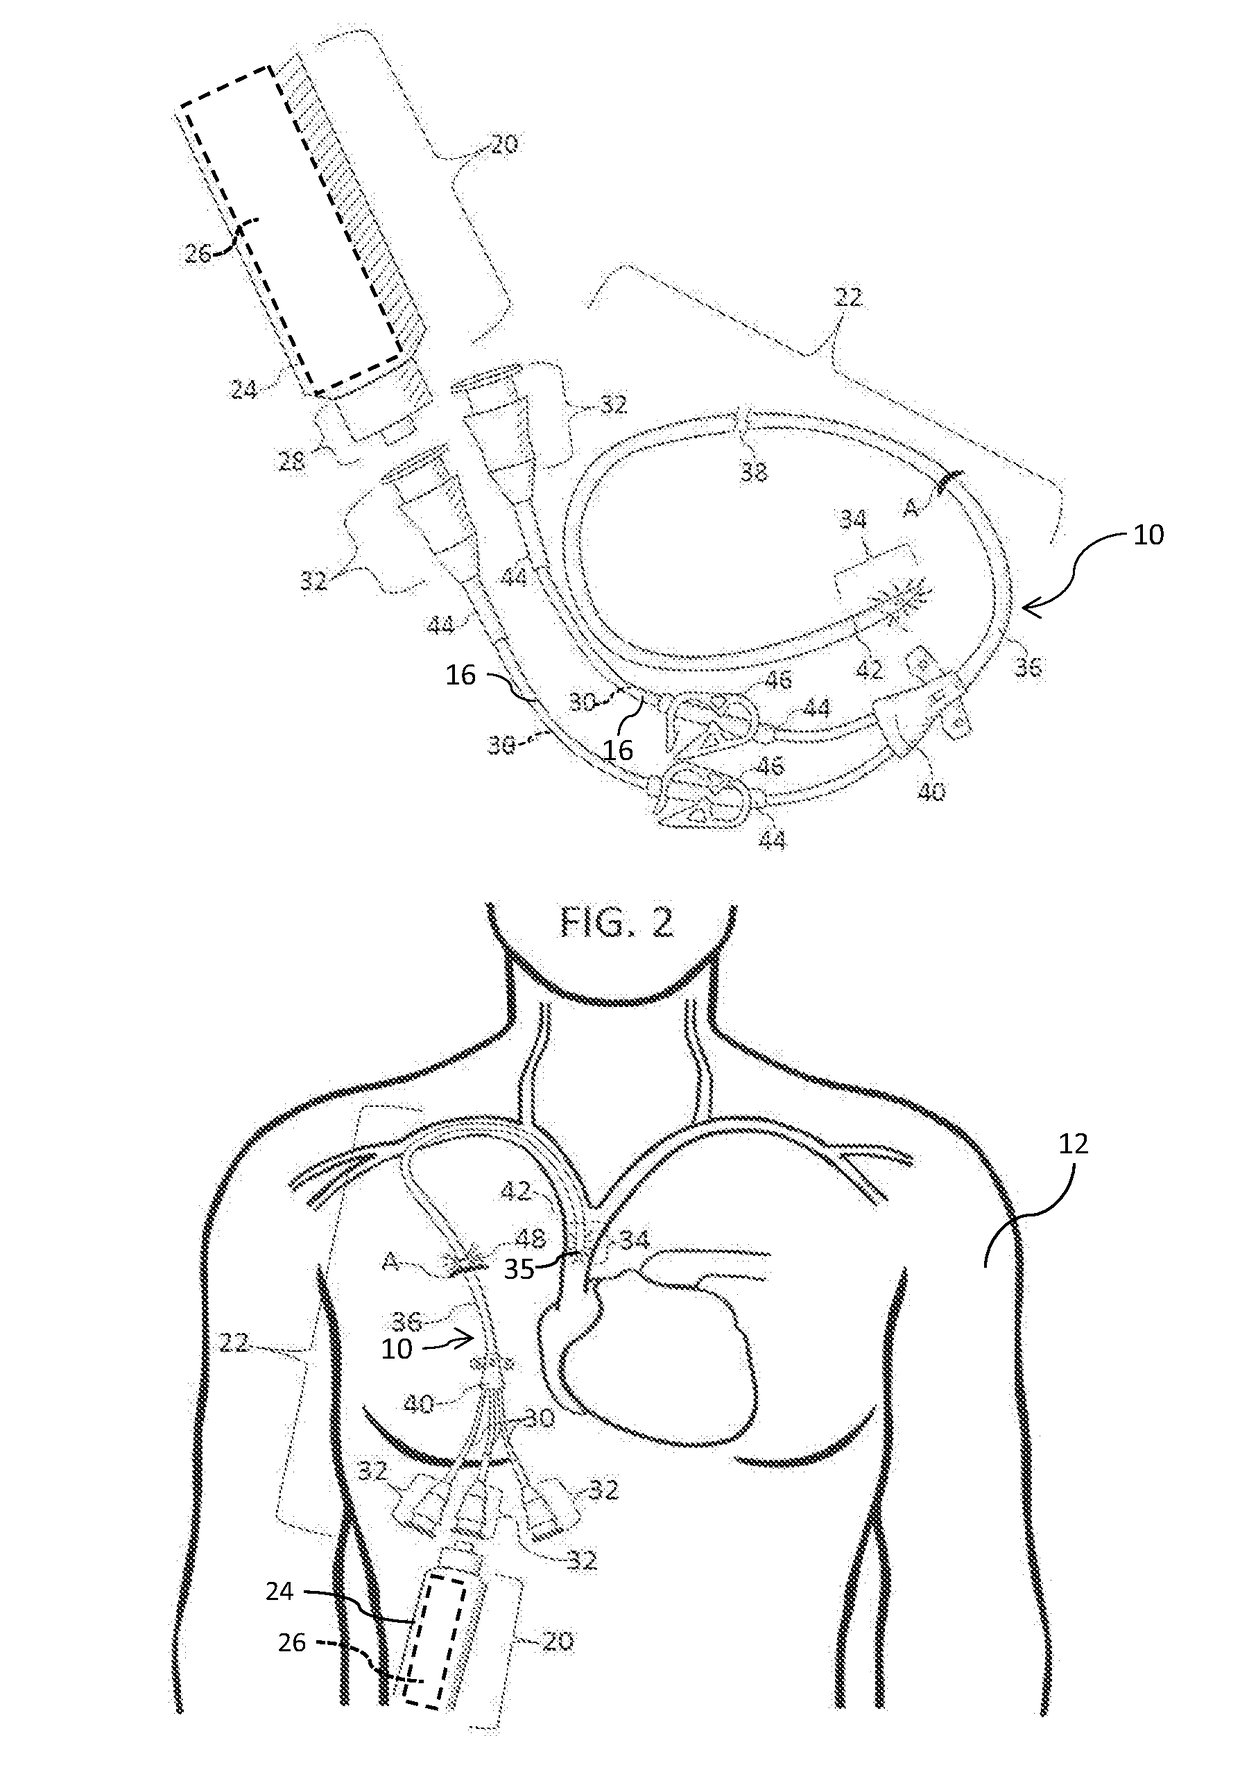 Methods and apparatus to deliver therapeutic, non-ultraviolet electromagnetic radiation to inactivate infectious agents and/or to enhance healthy cell growth via a catheter residing in a body cavity